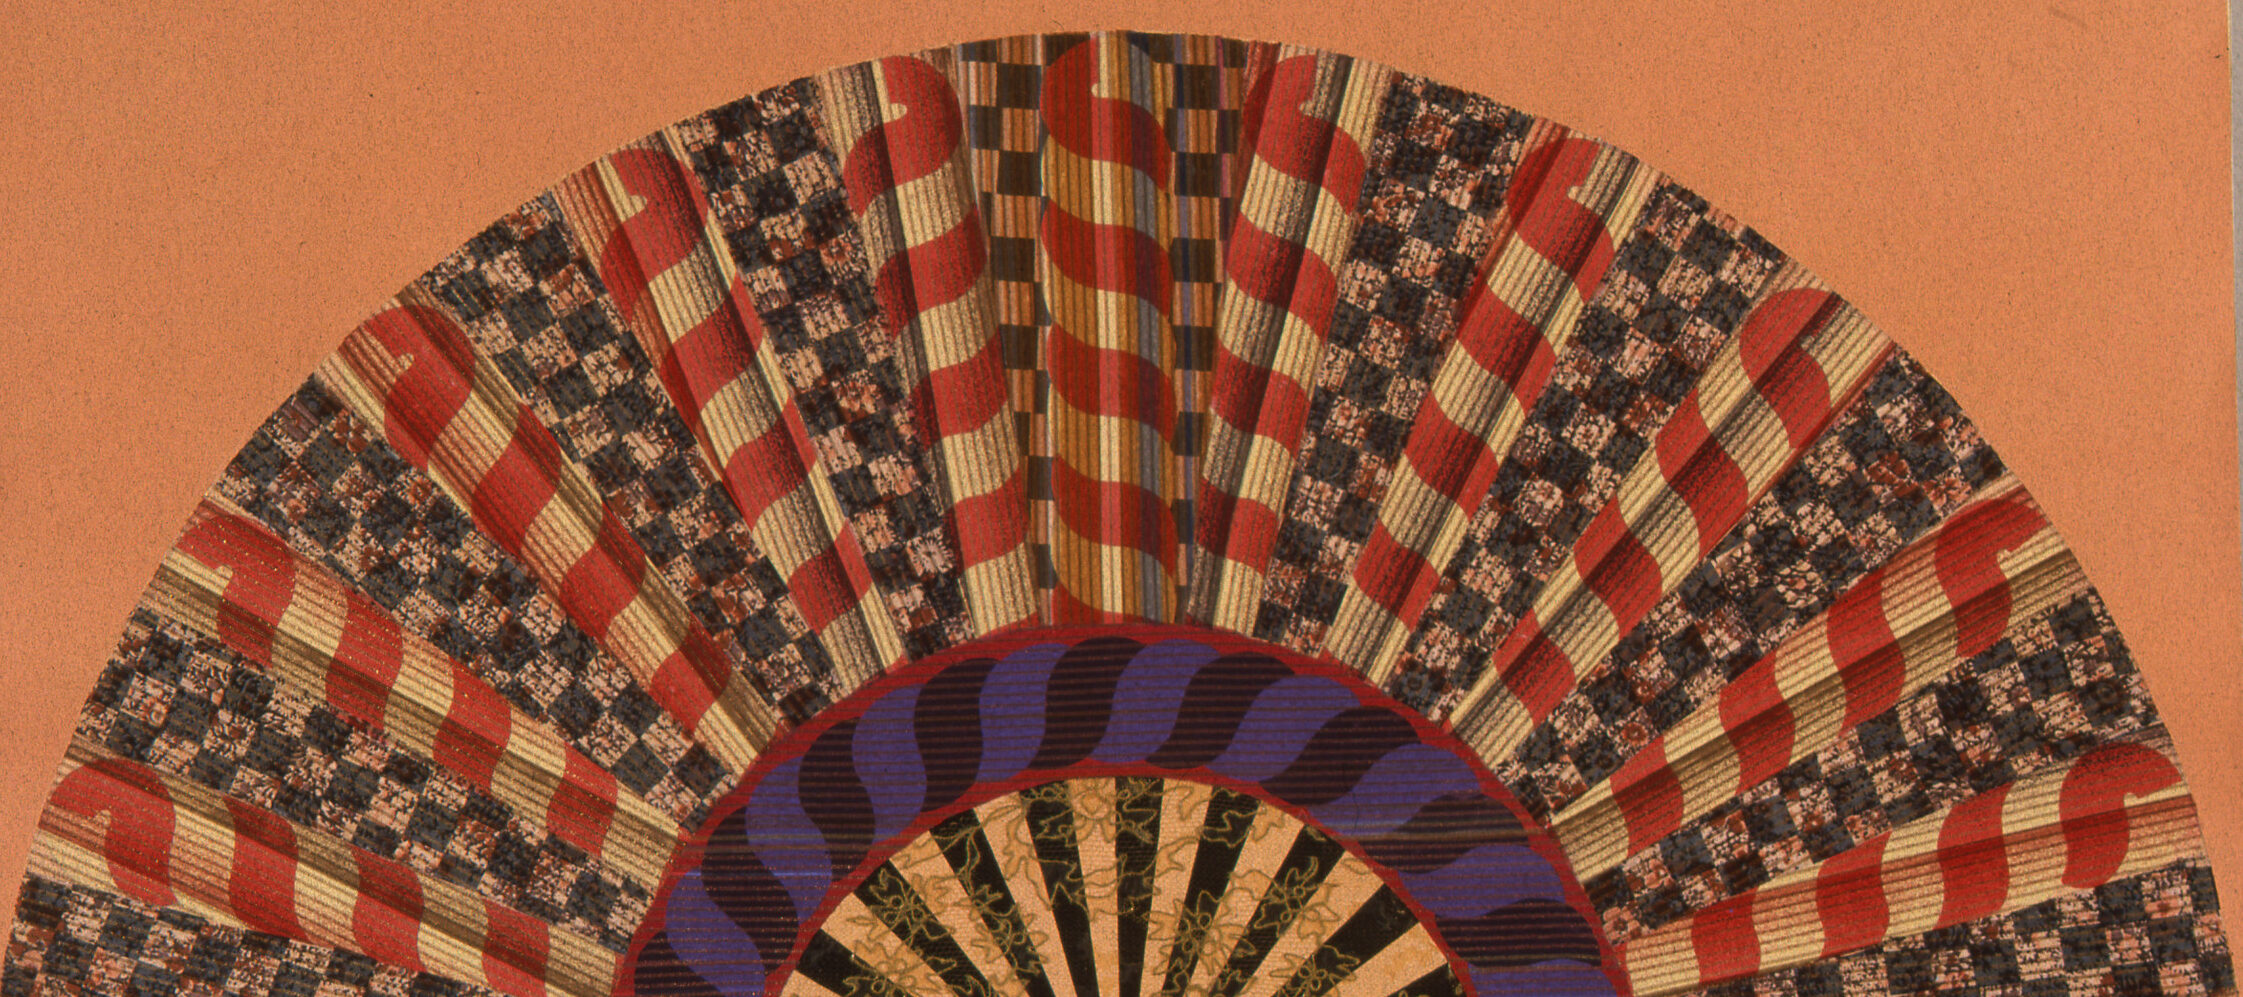 A colorfully painted and collaged folding fan spread open on a peach-orange background.